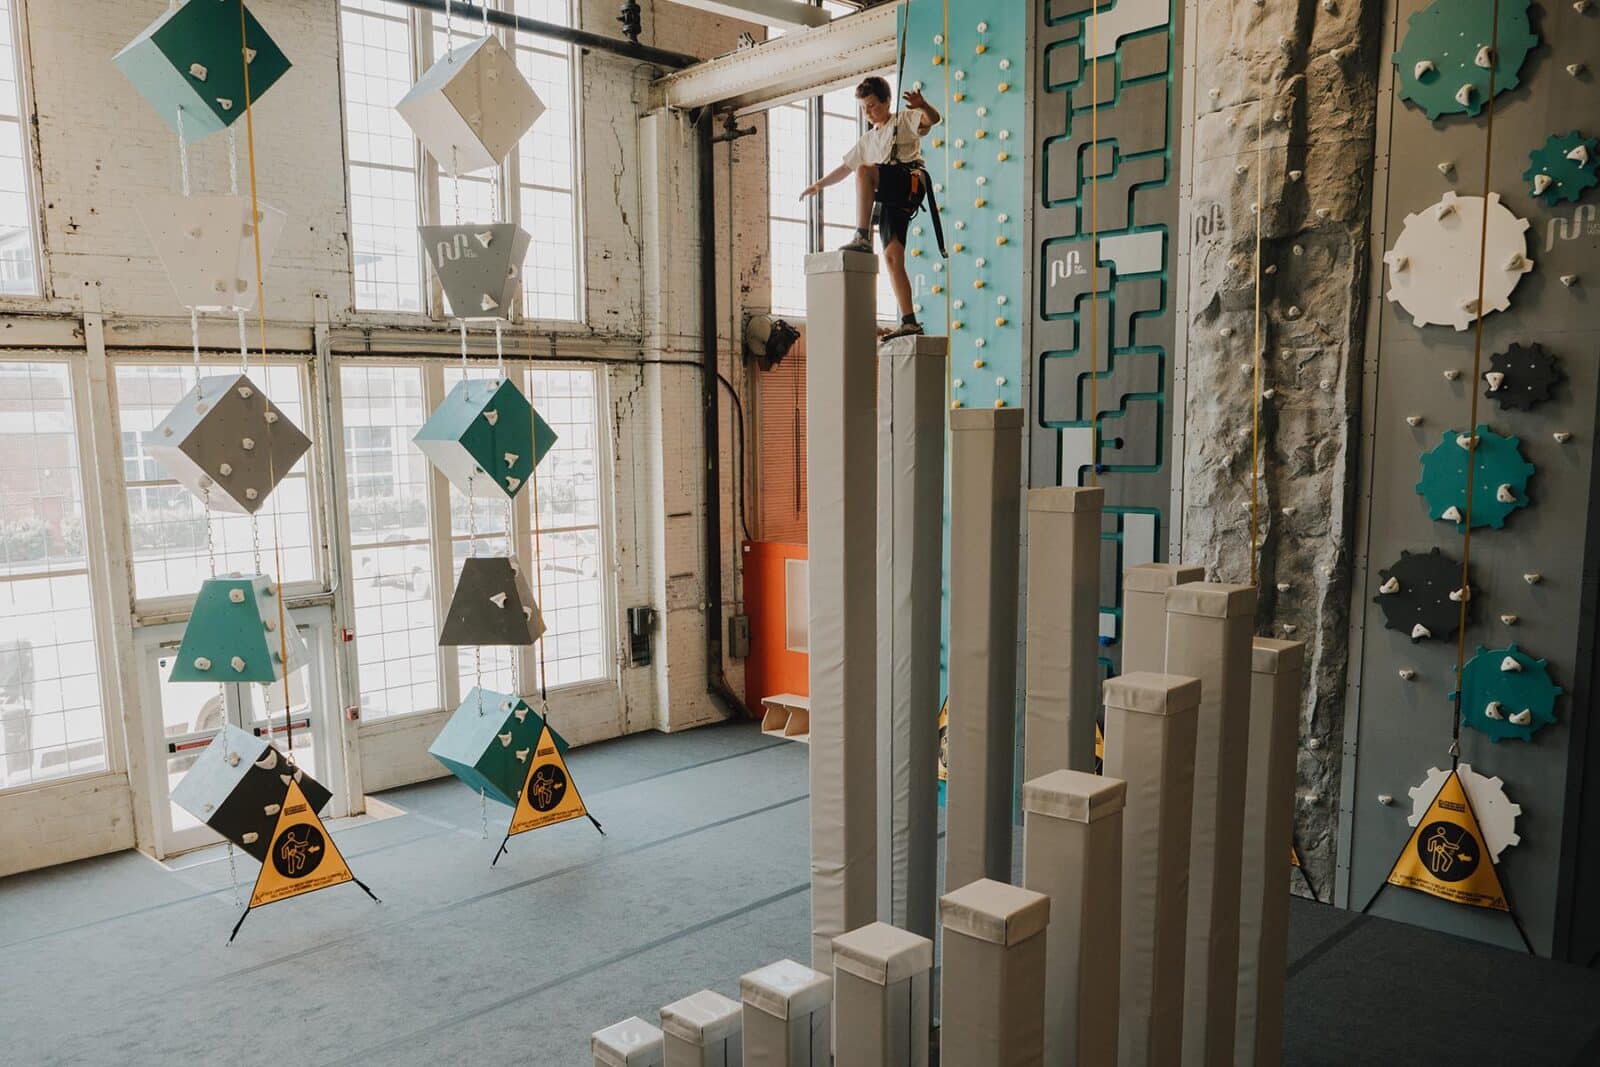 Boy balances on the towers in the Gravity Lab at Climb So iLL.